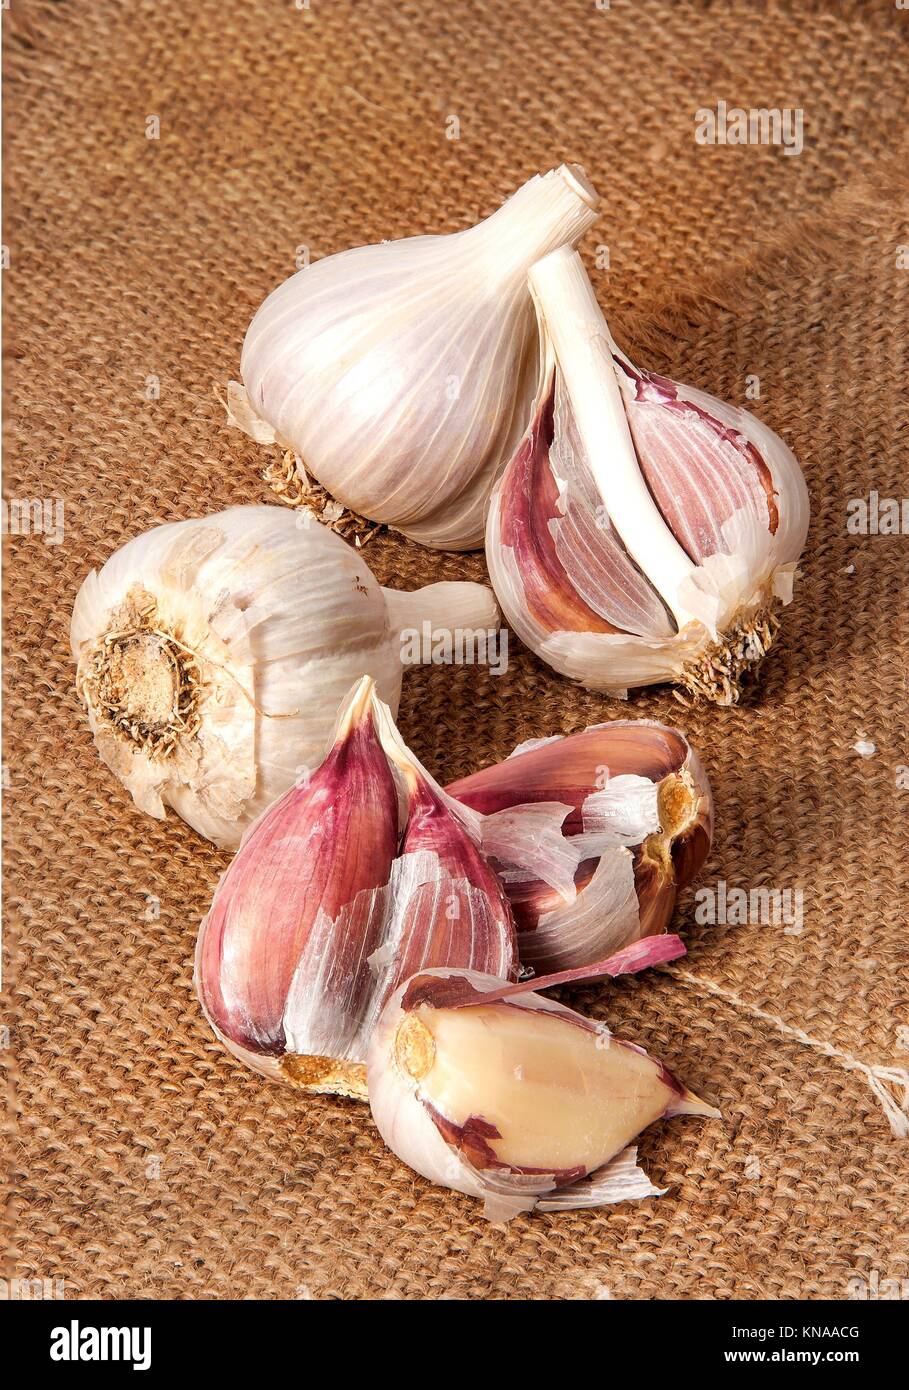 Garlic wholly and cloves scattered on sackcloth. Stock Photo